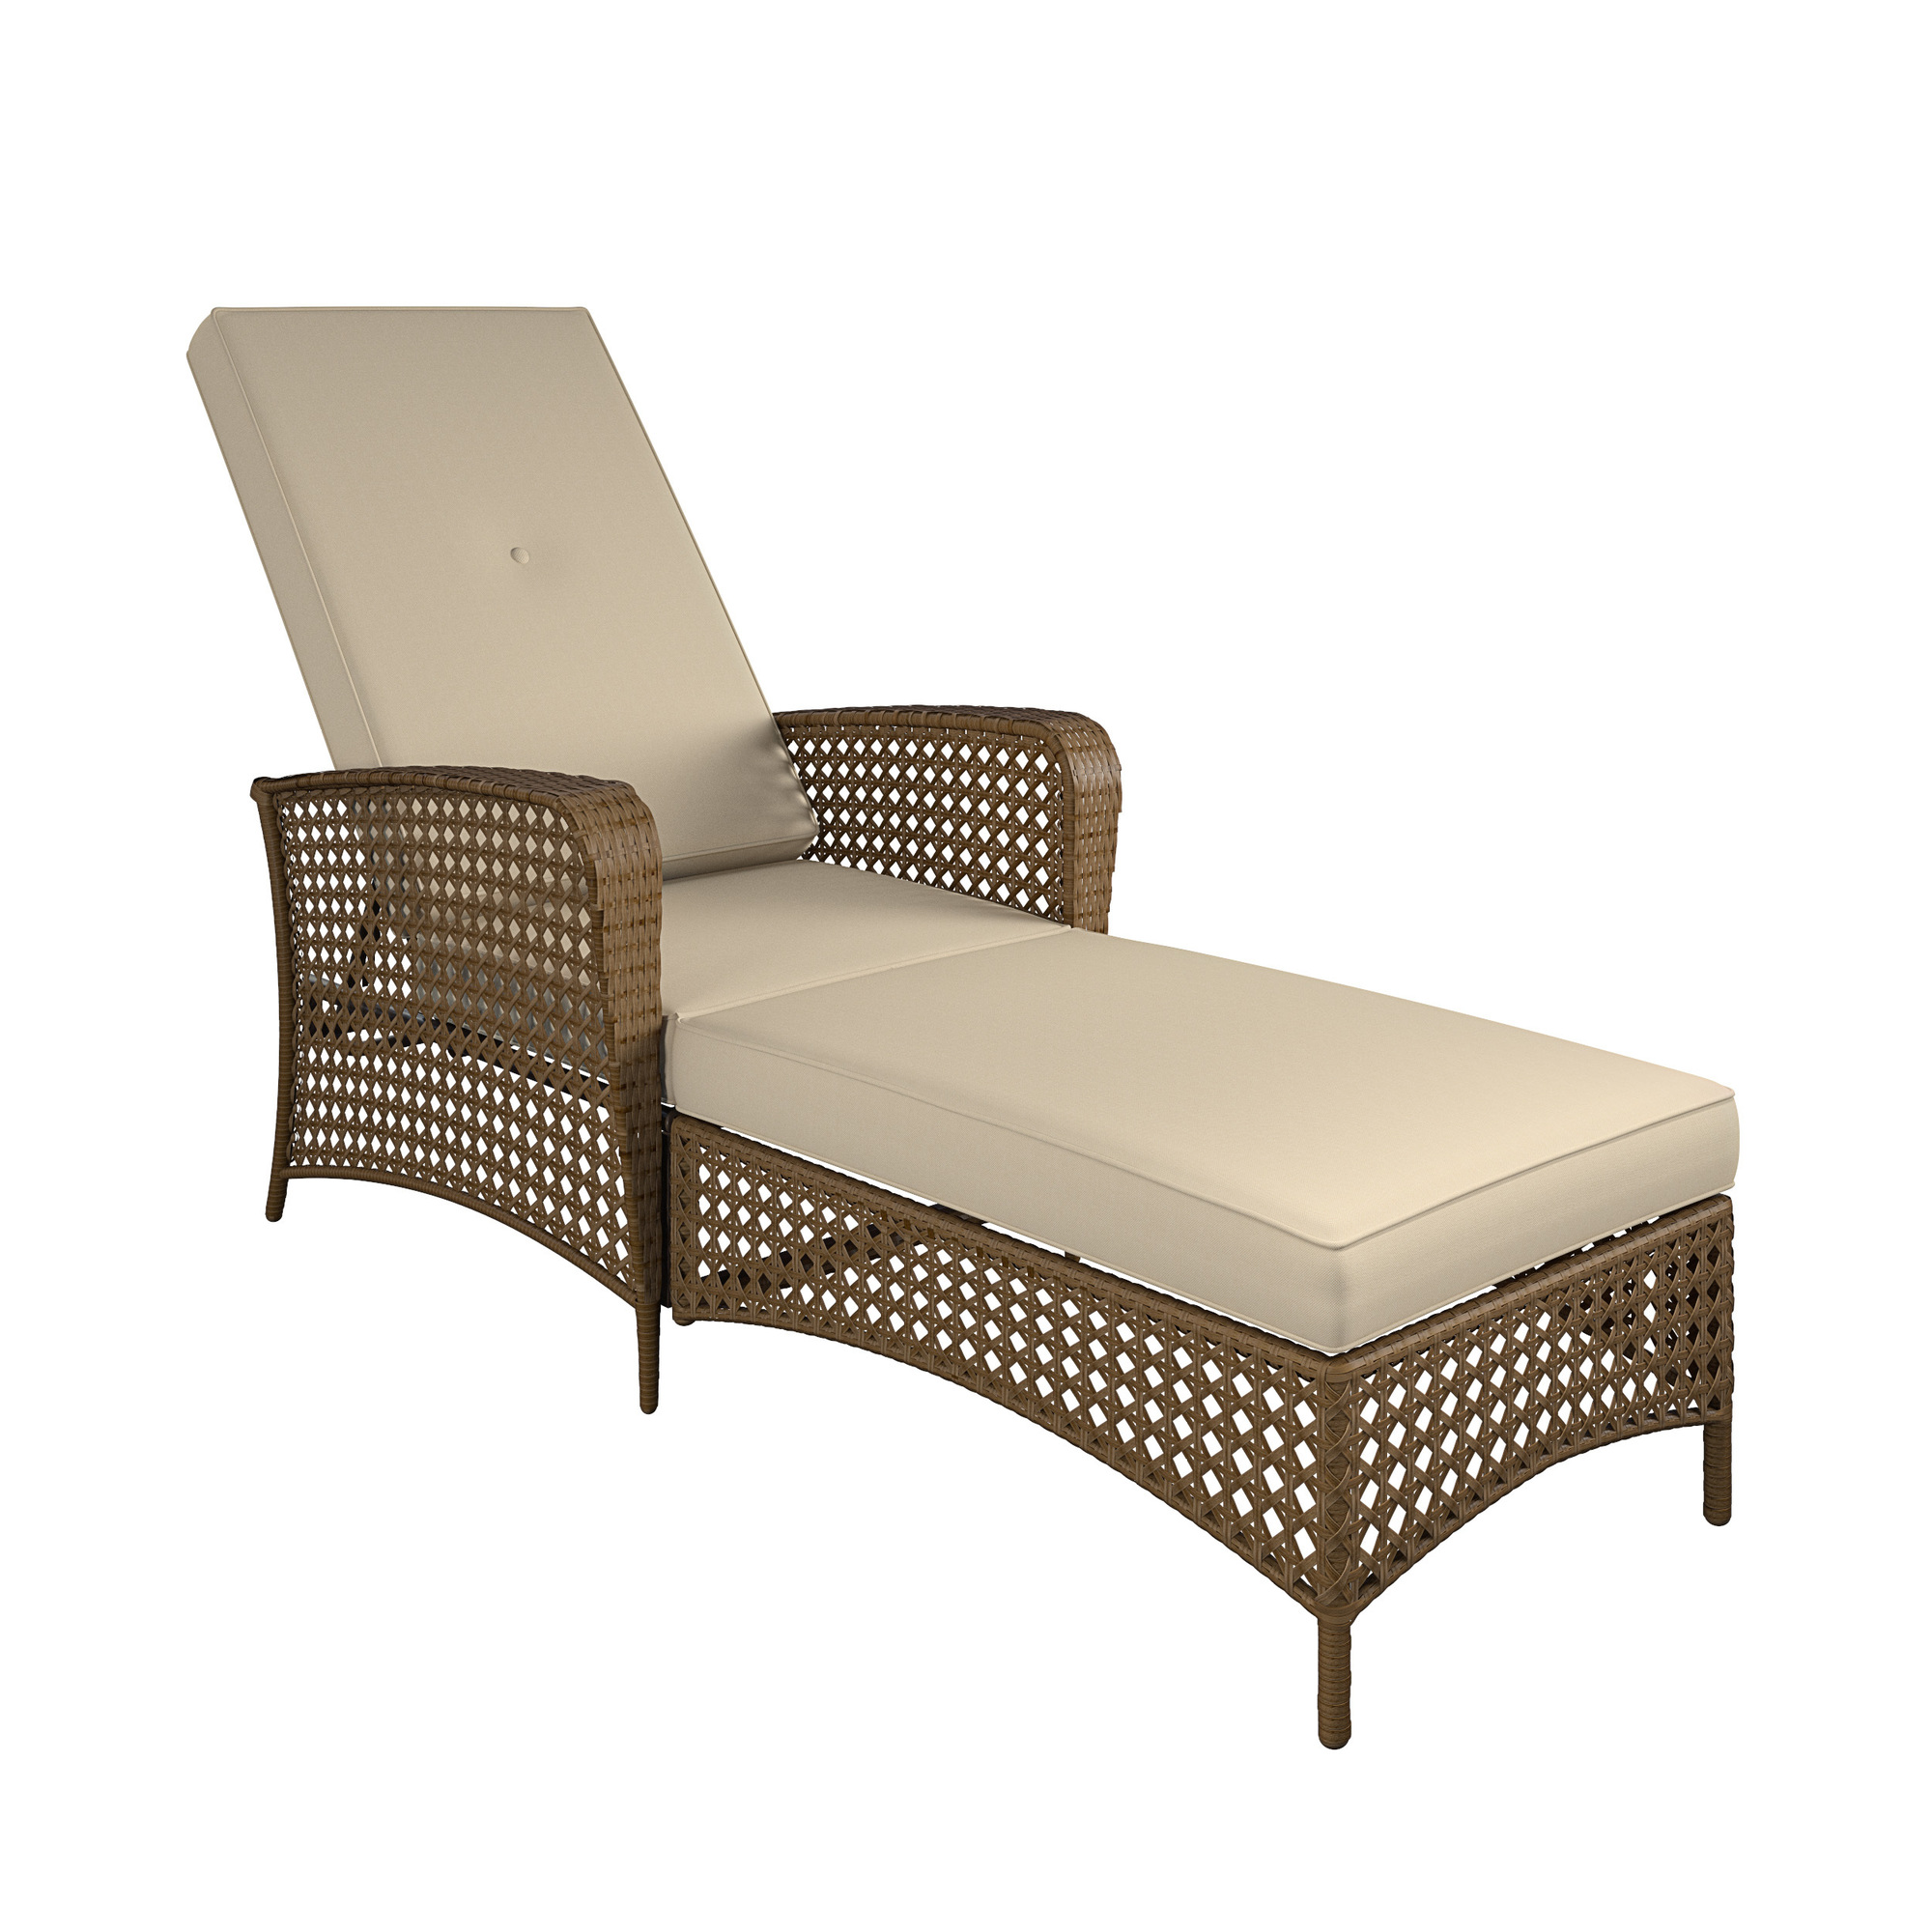 Lakewood Ranch Steel Woven Wicker Chaise Lounge, Primary Color Tan, Material Multiple, Width 23.03 in, Model - Cosco 88599ABTE